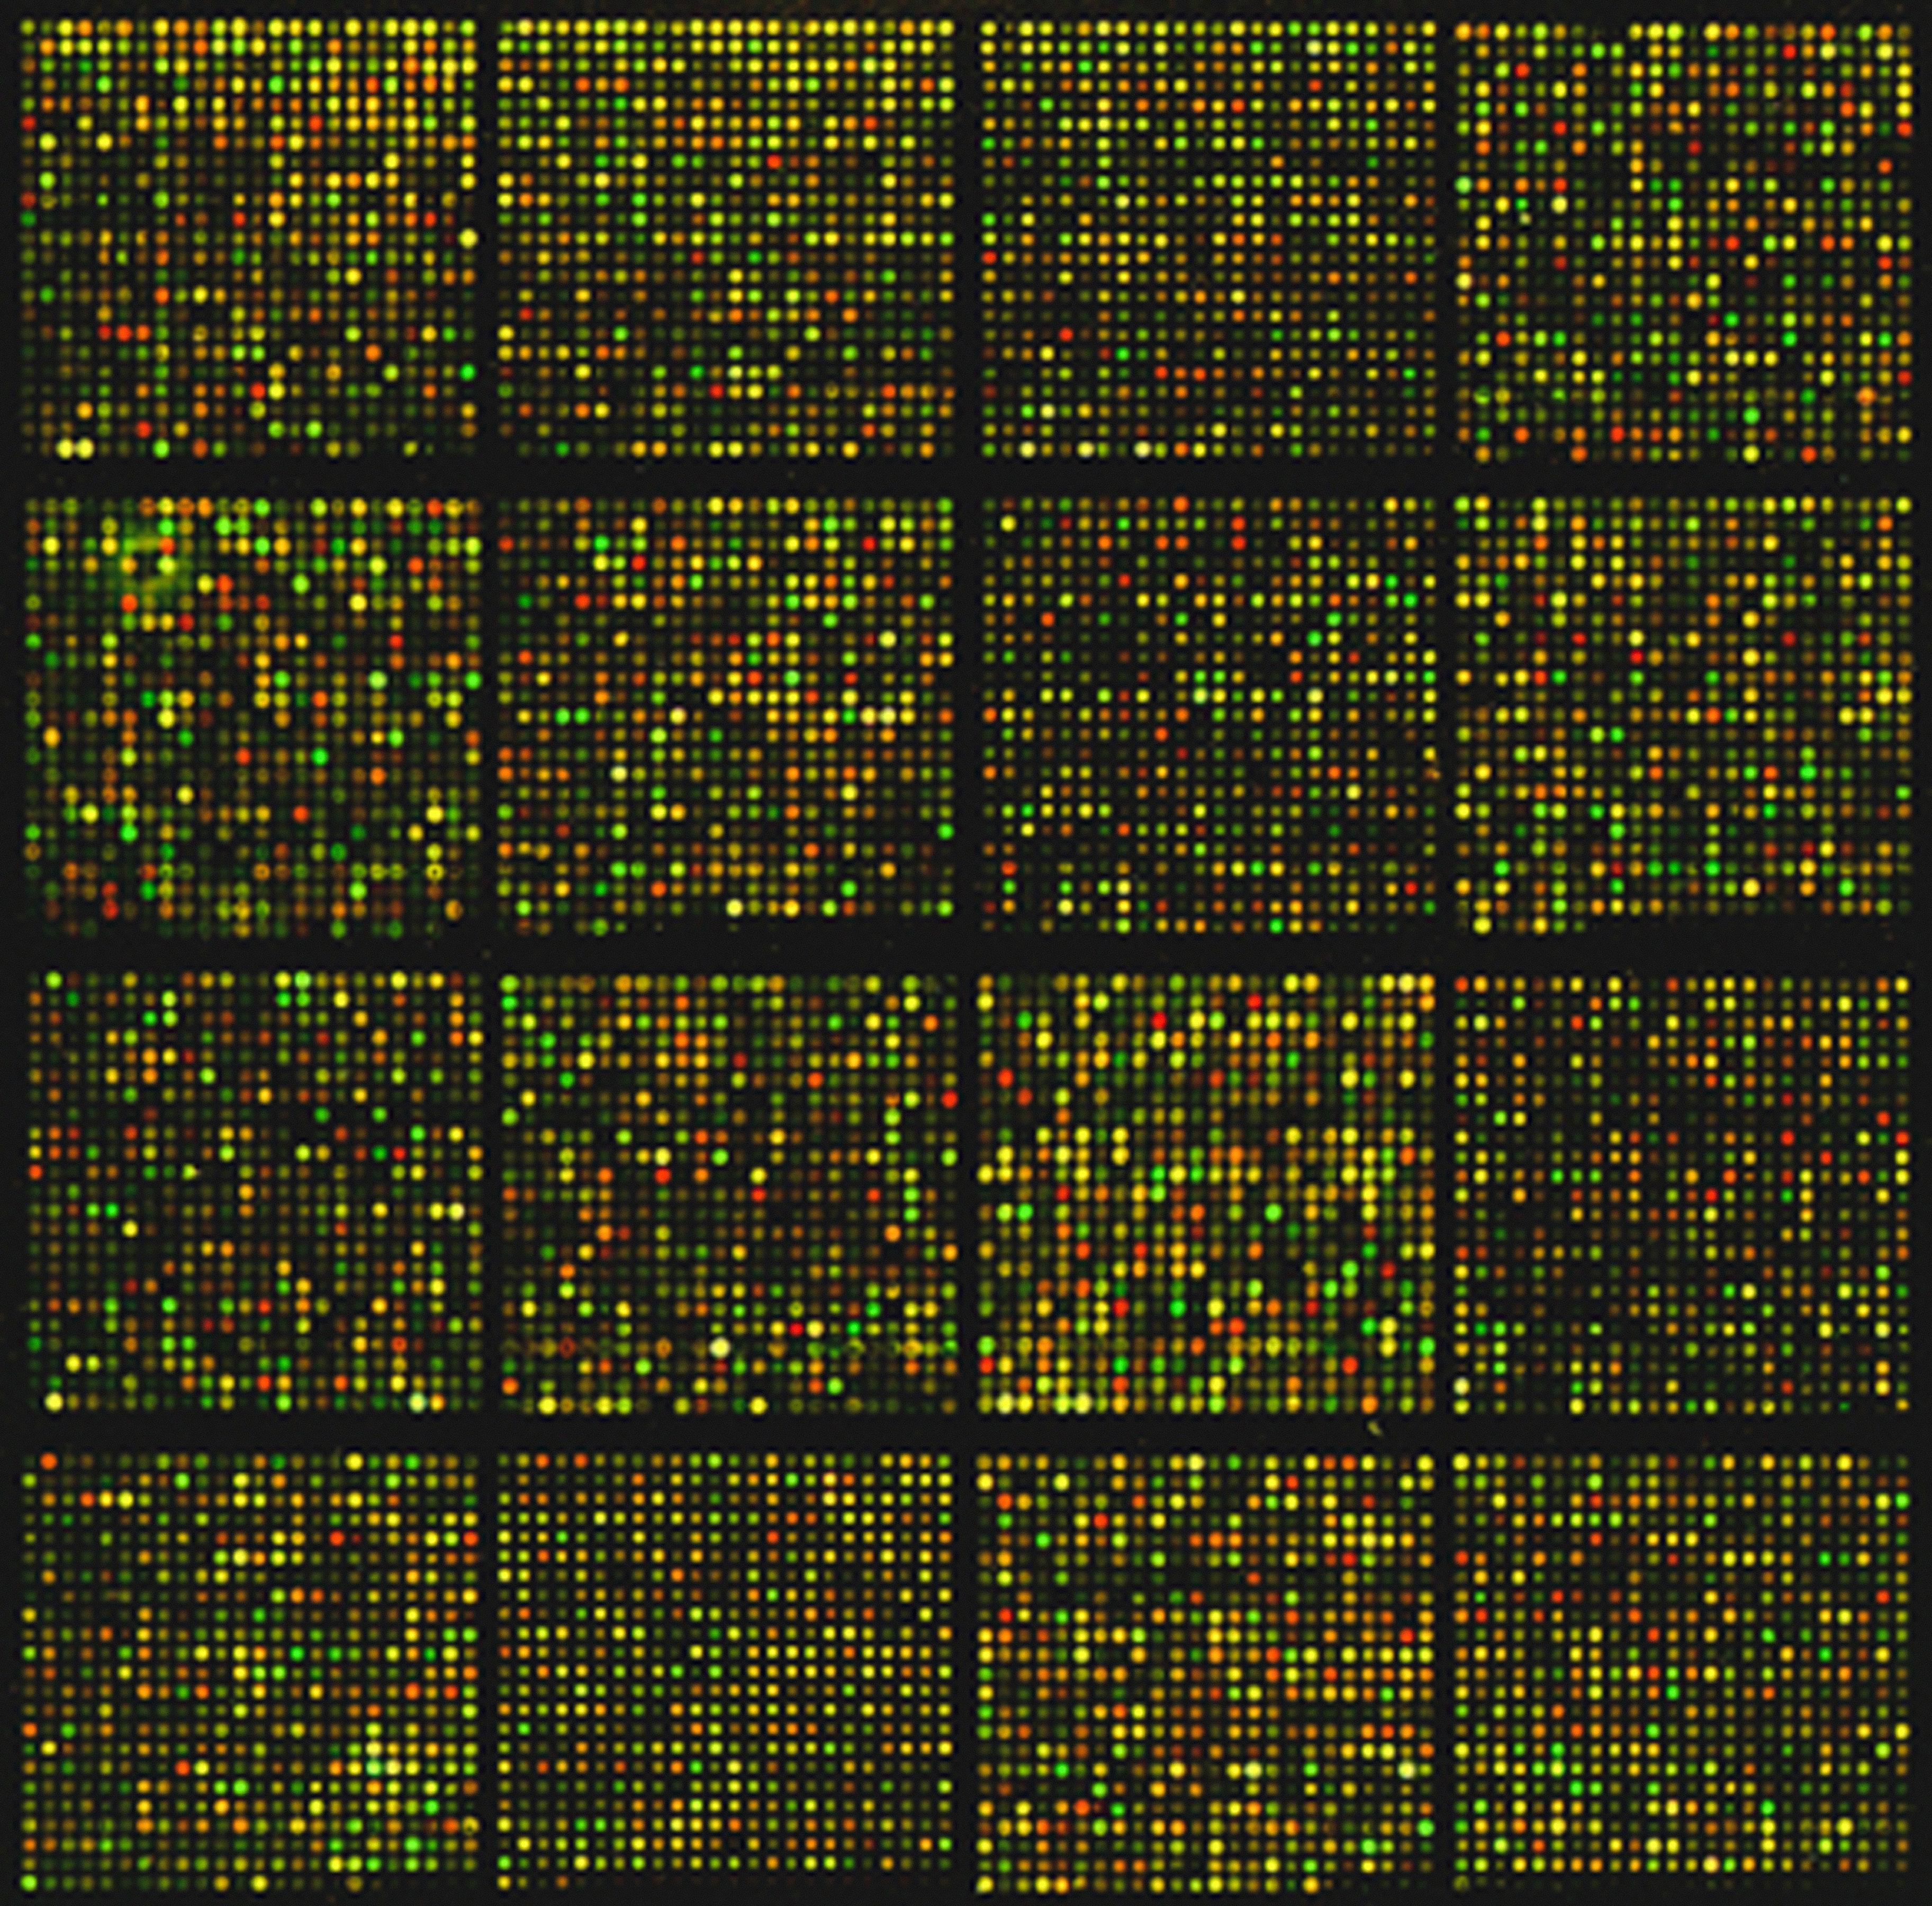 a colorful microarray of mouse DNA